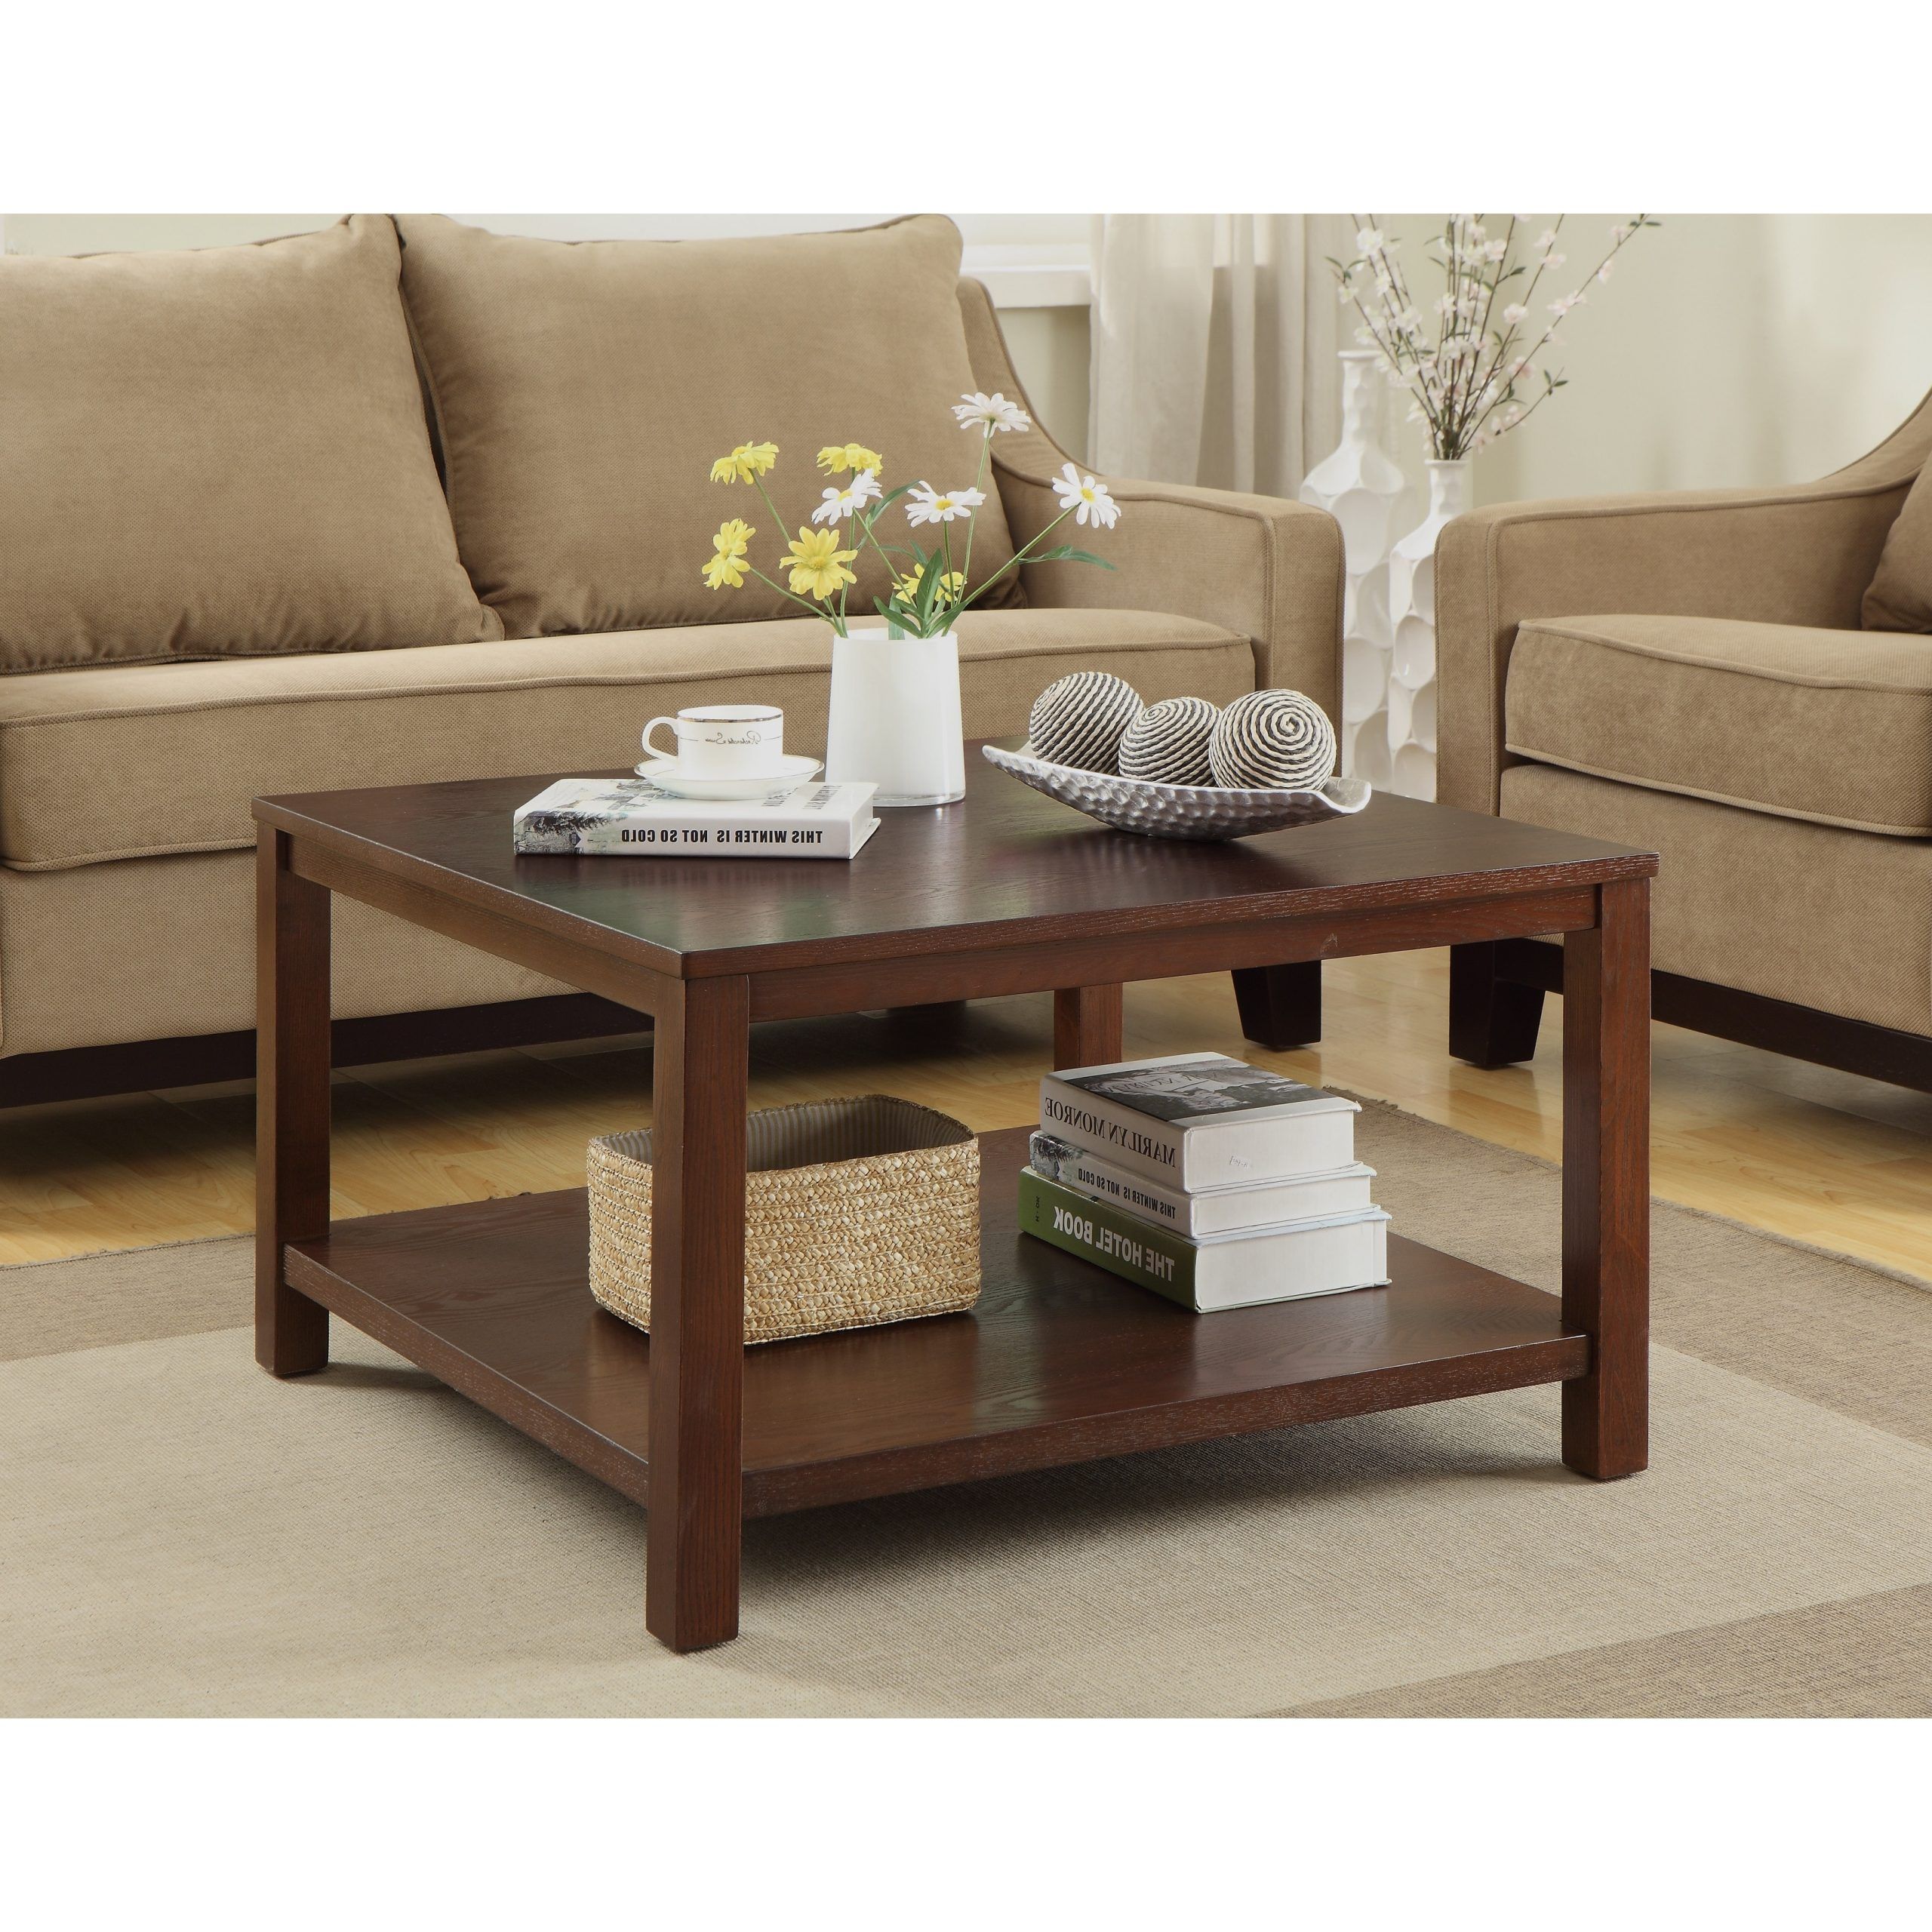 Square Coffee Table With Dual Shelves Solid Wood Legs & Wood | Ebay For Coffee Tables With Solid Legs (View 10 of 20)